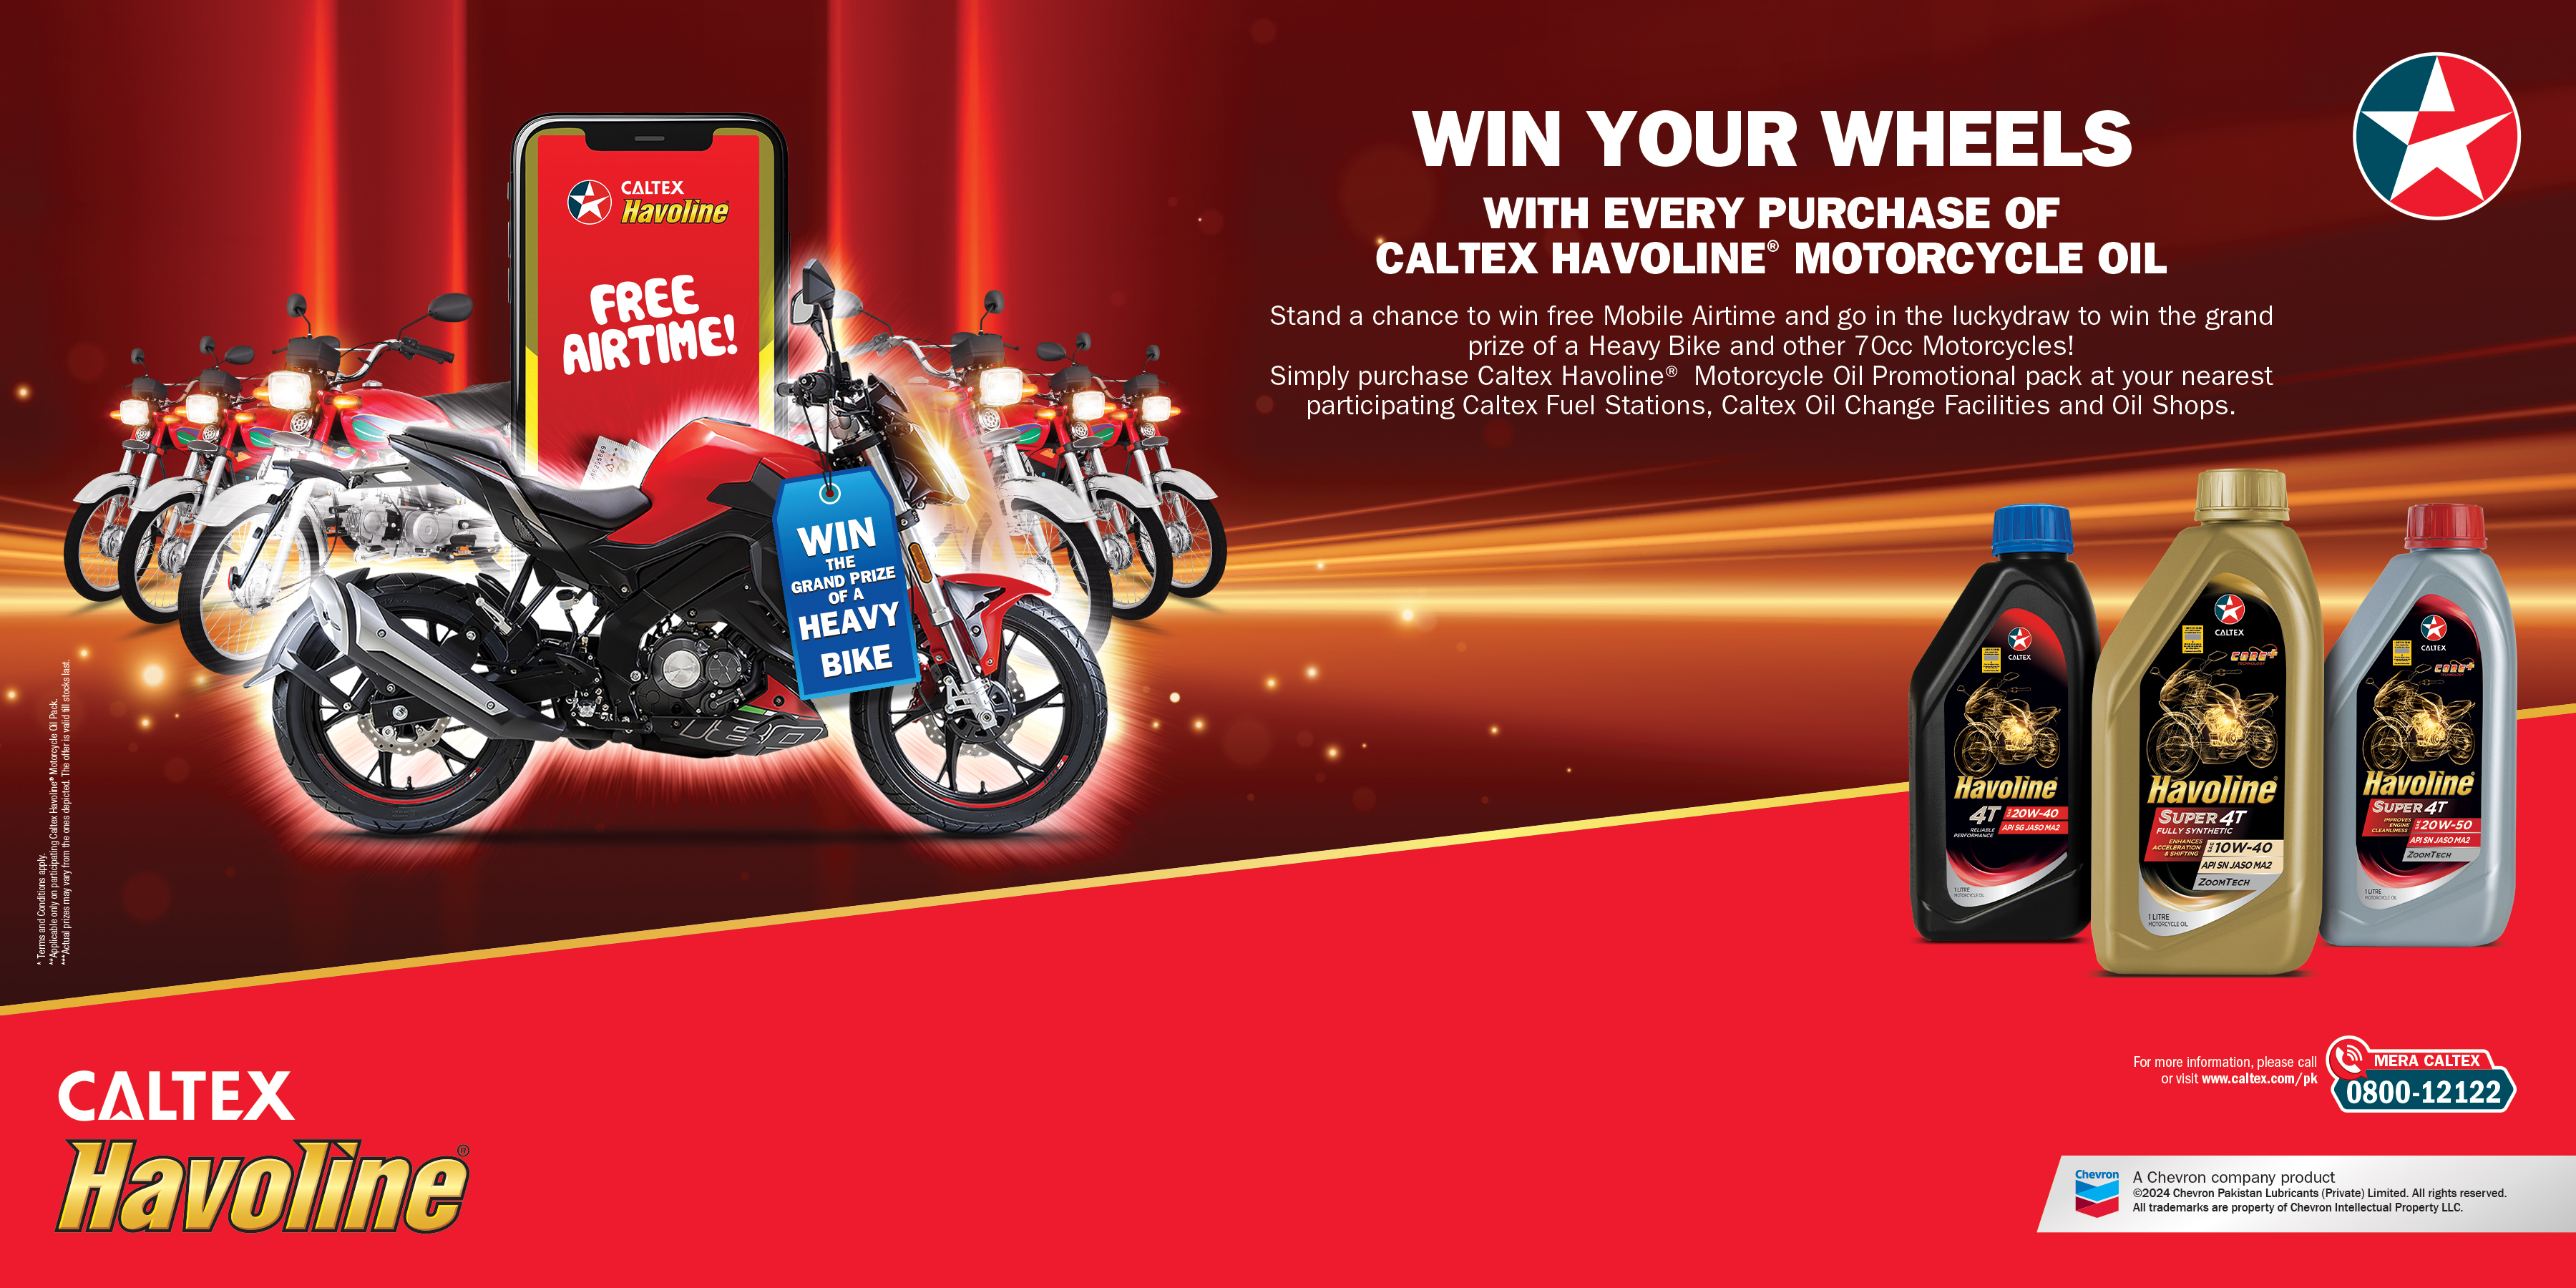 Win Your Wheels with every purchase of Caltex Havoline® Motorcycle Oil